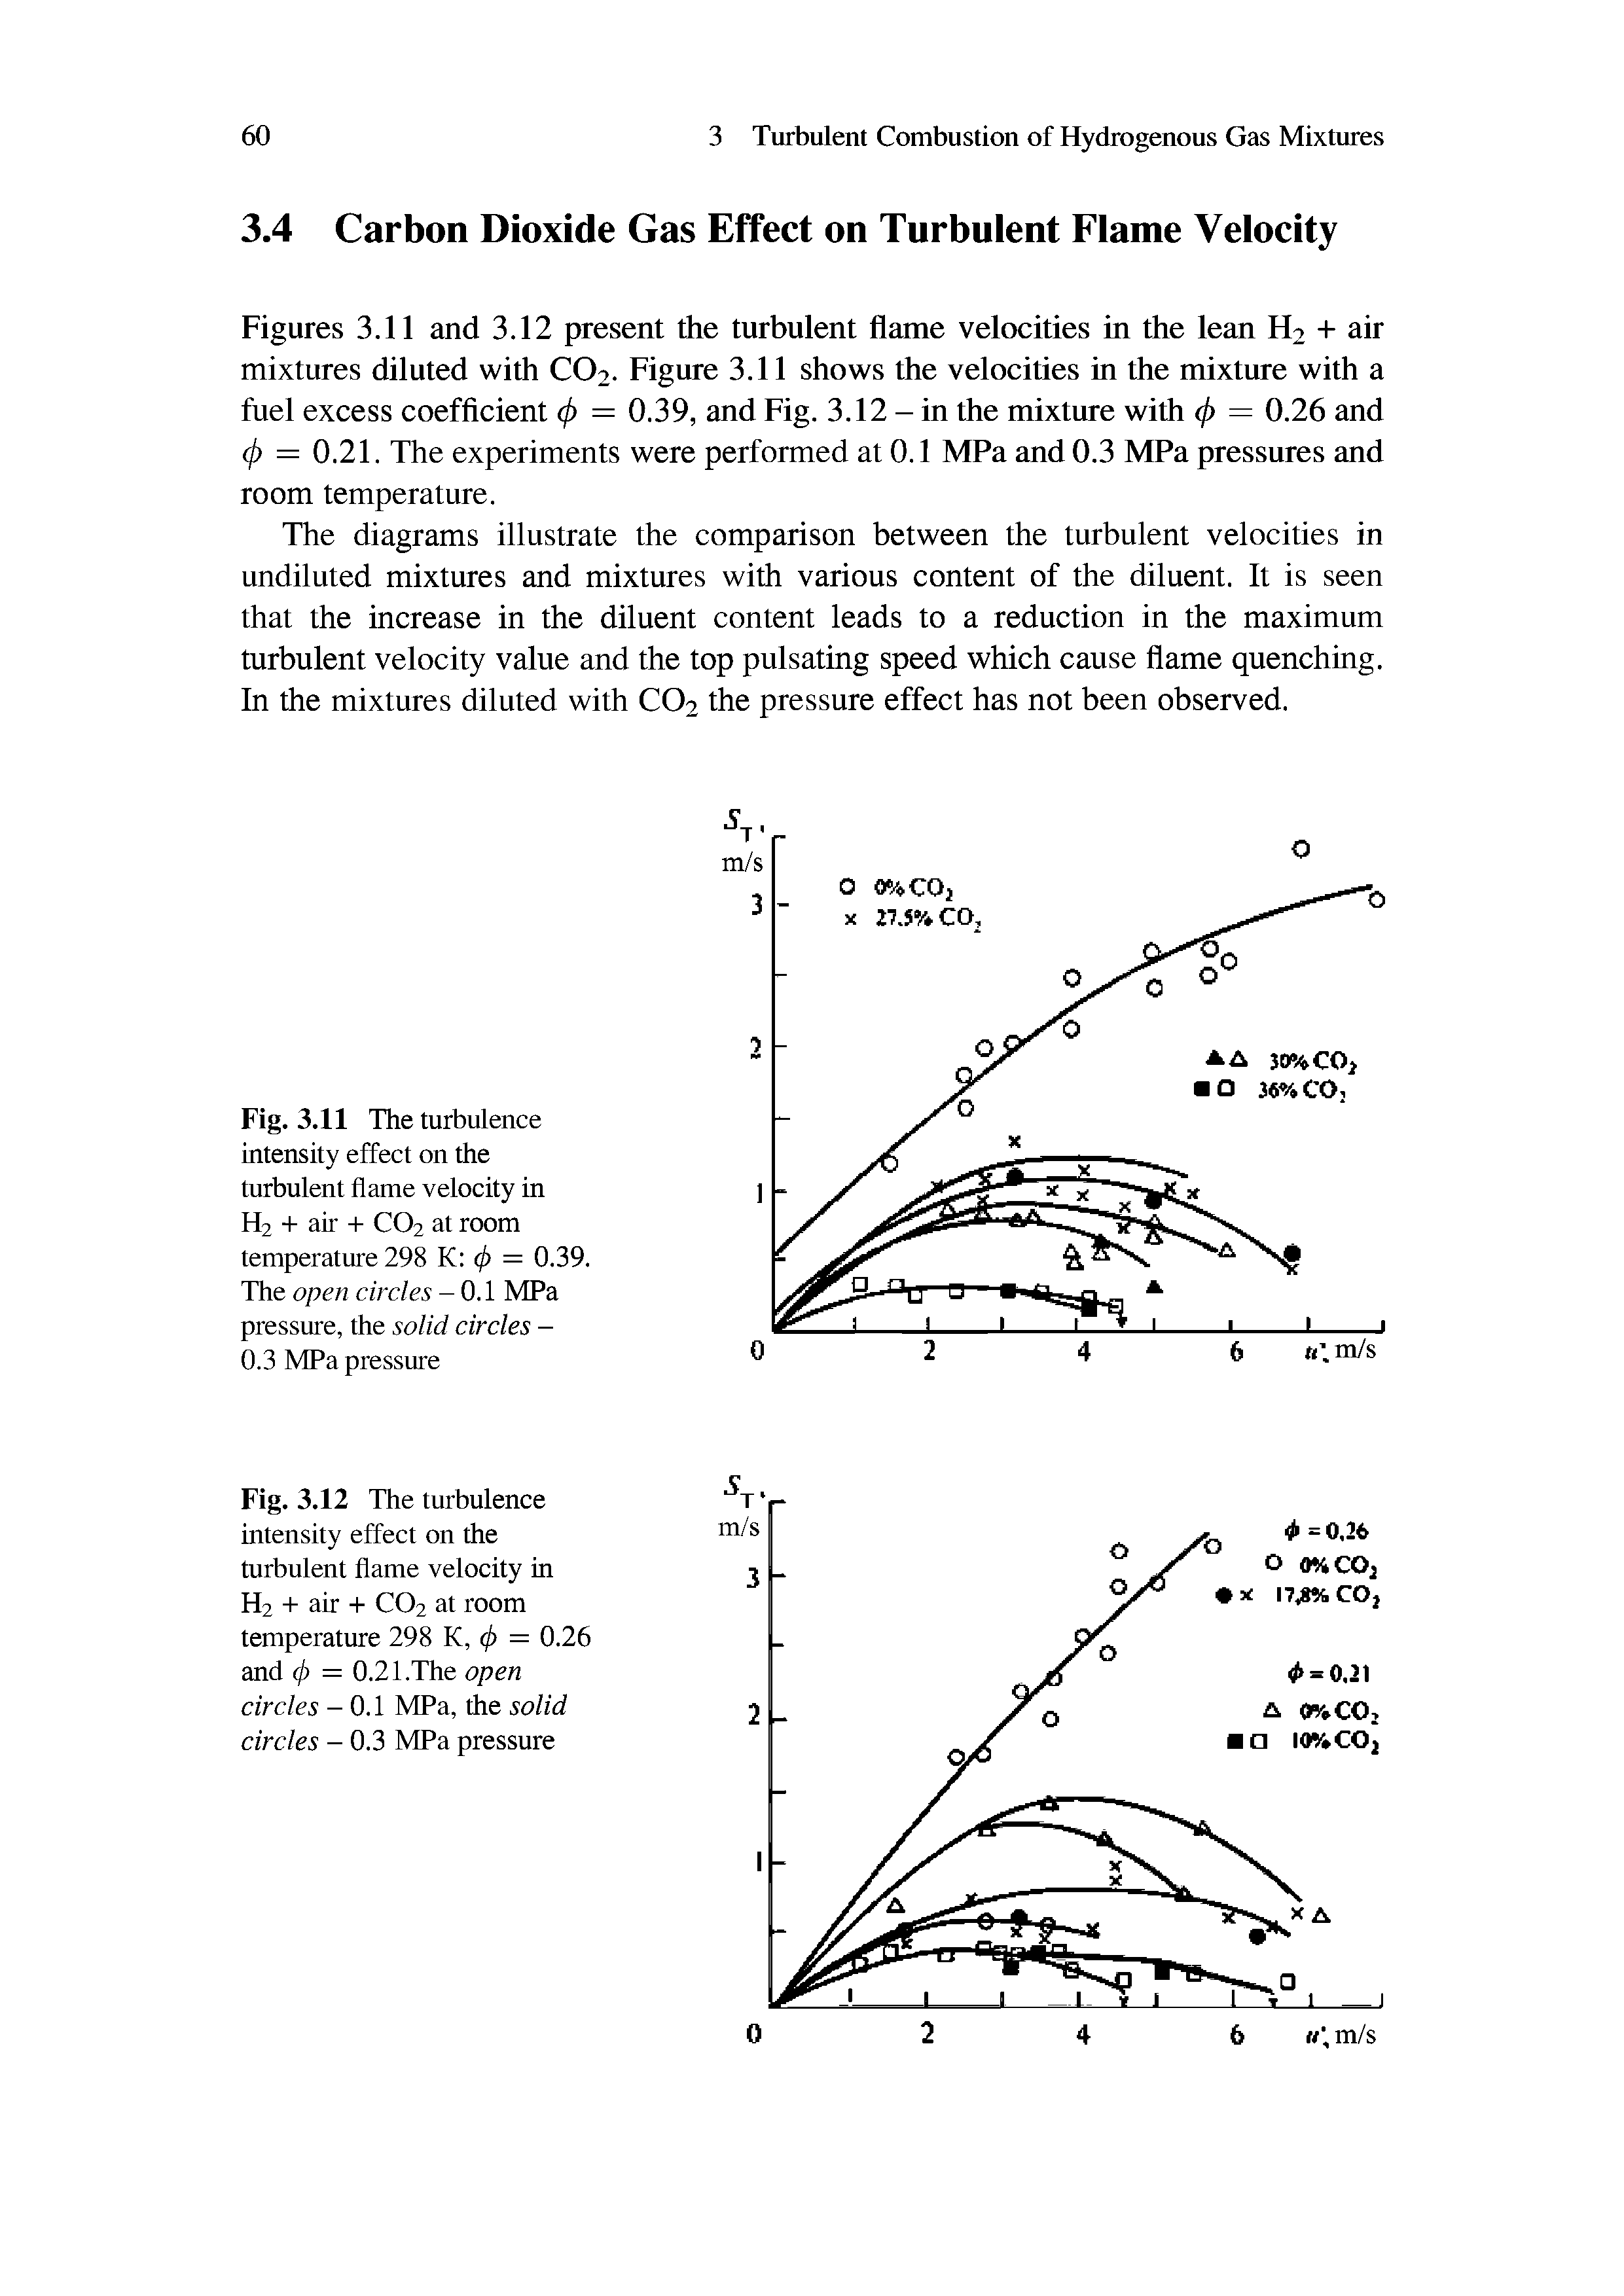 Figures 3.11 and 3.12 present the turbulent flame velocities in the lean H2 + air mixtures diluted with CO2. Figure 3.11 shows the velocities in the mixture with a fuel excess coefficient (f) = 0.39, and Fig. 3.12 - in the mixture with 0 = 0.26 and 0 = 0.21. The experiments were performed at 0.1 MPa and 0.3 MPa pressures and room temperature.